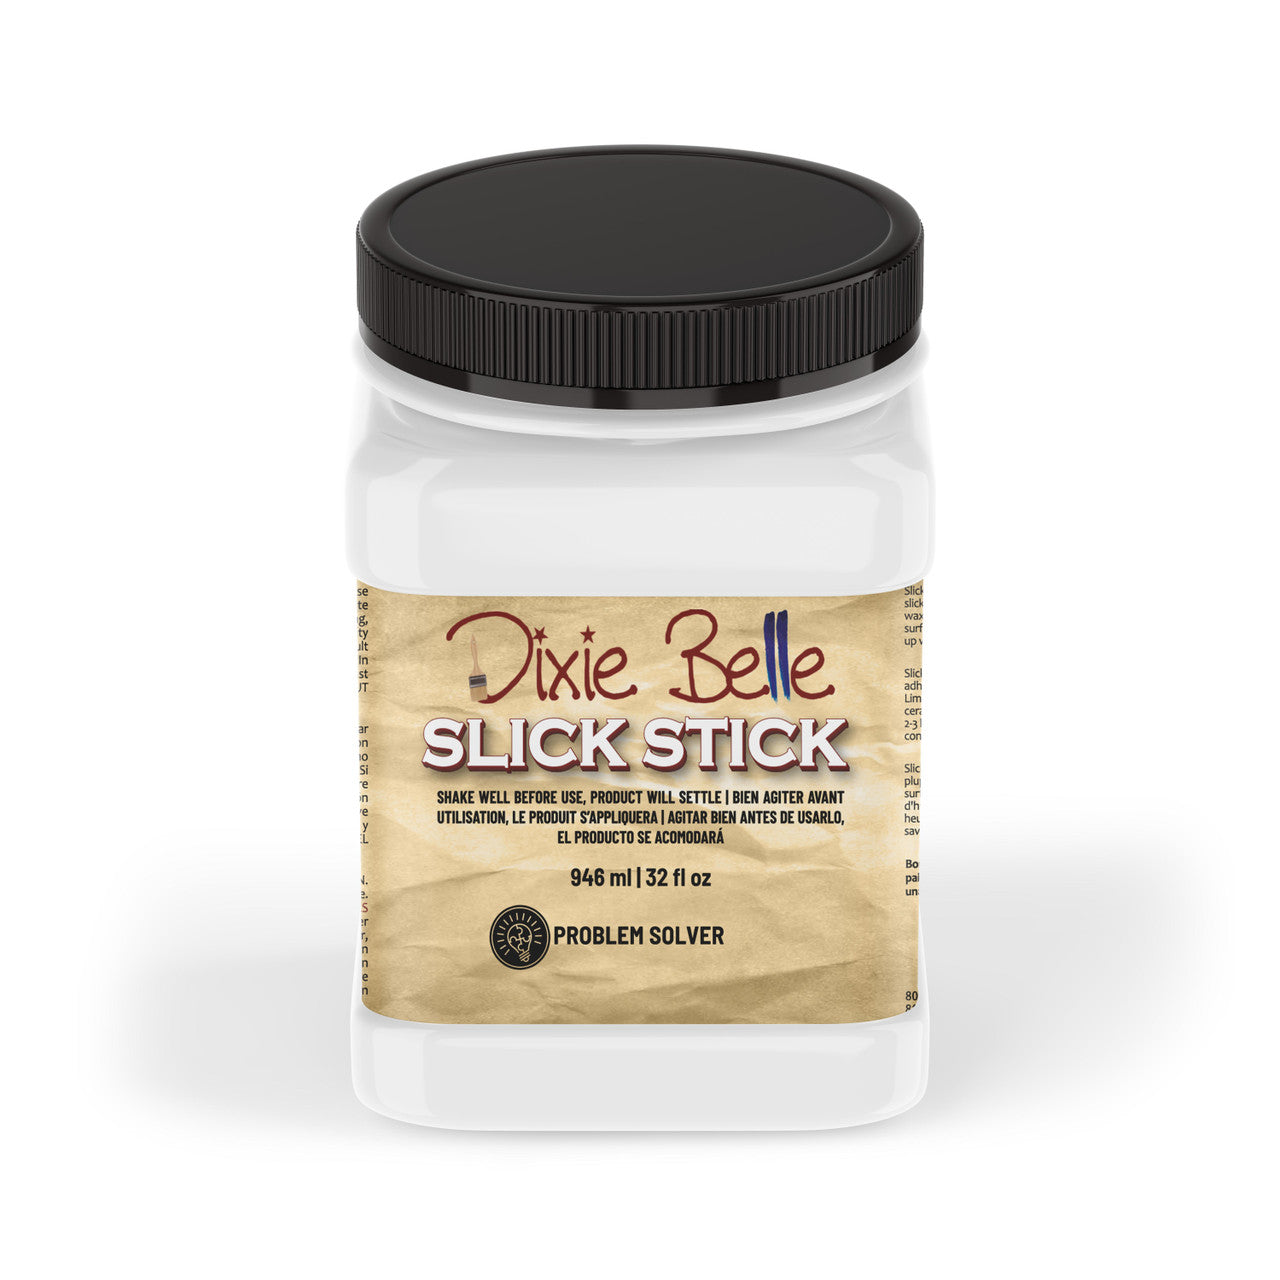 Slick Stick by Dixie Belle